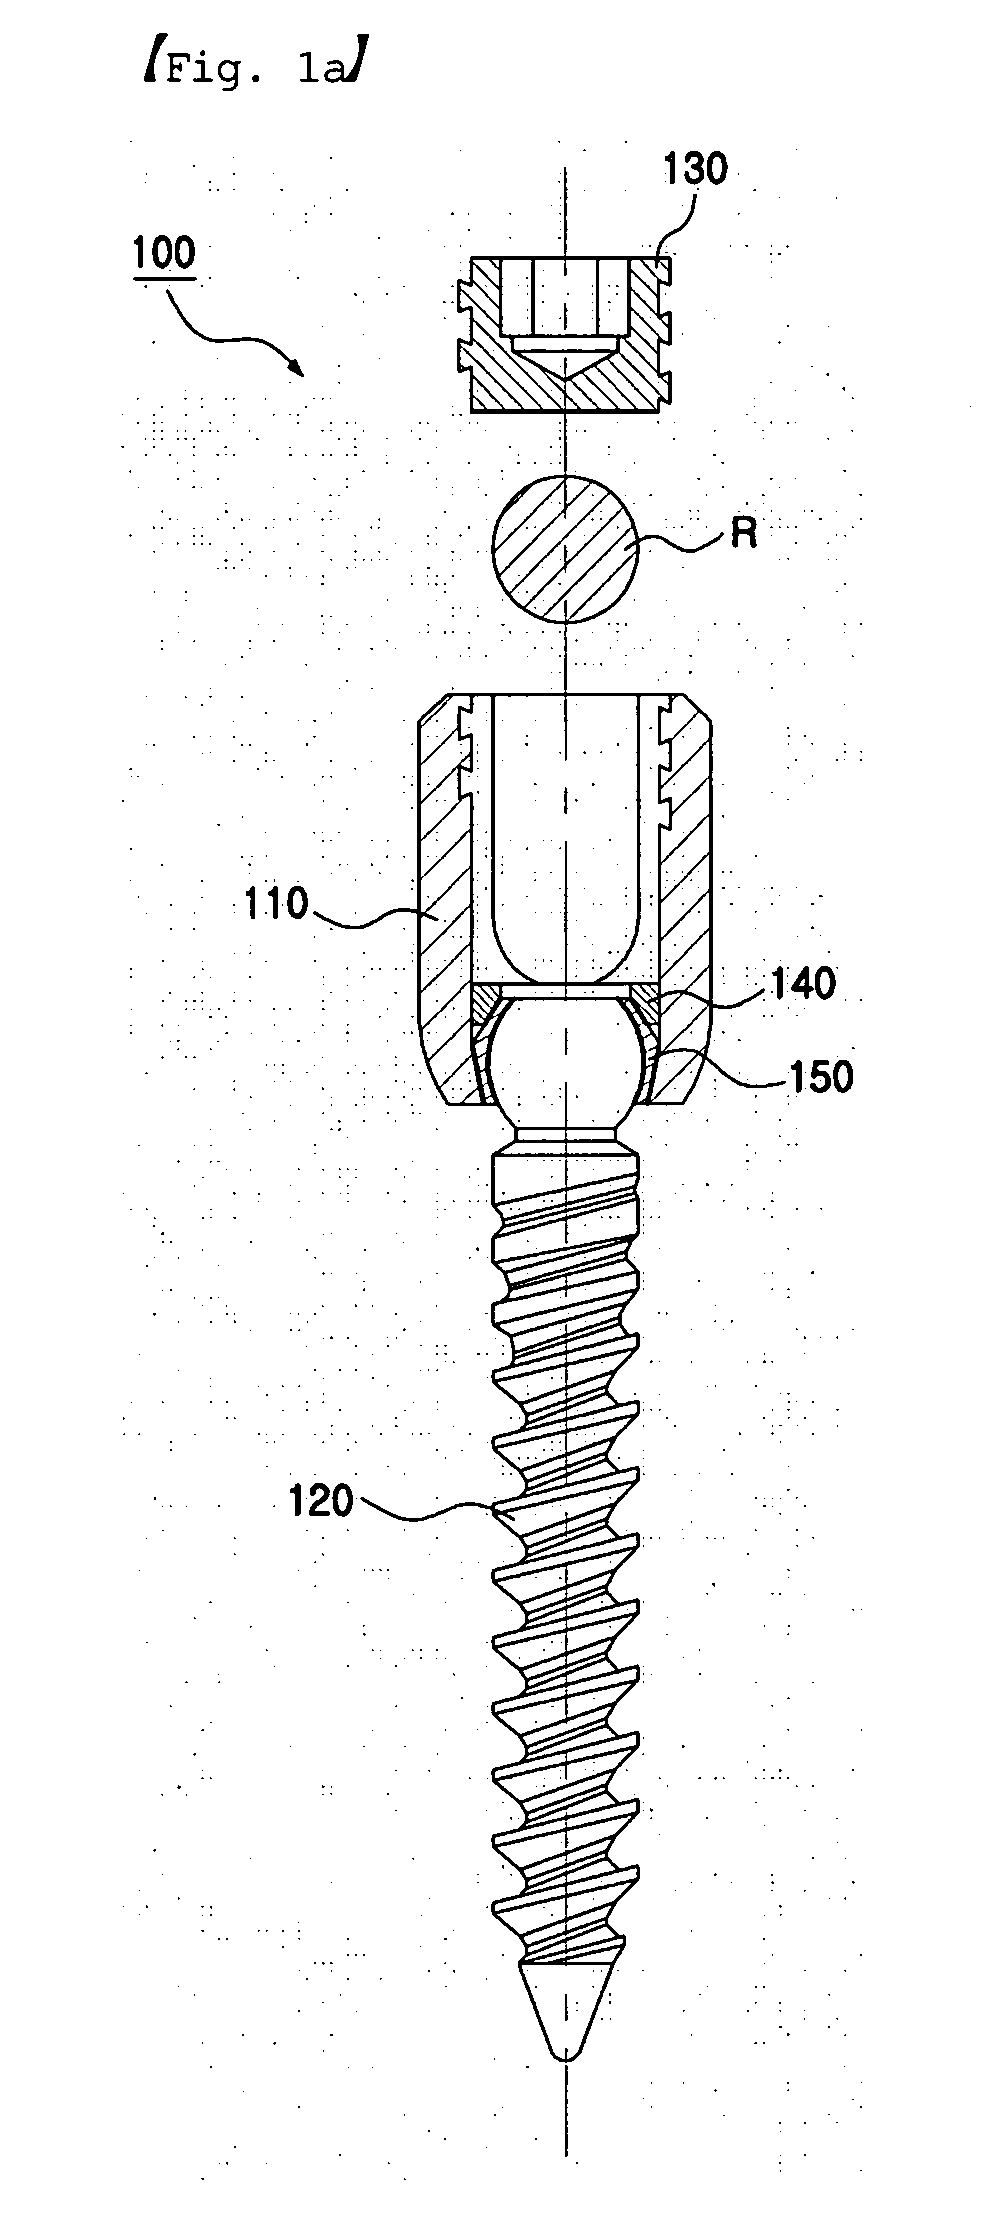 Multi-axial spinal pedicle screw